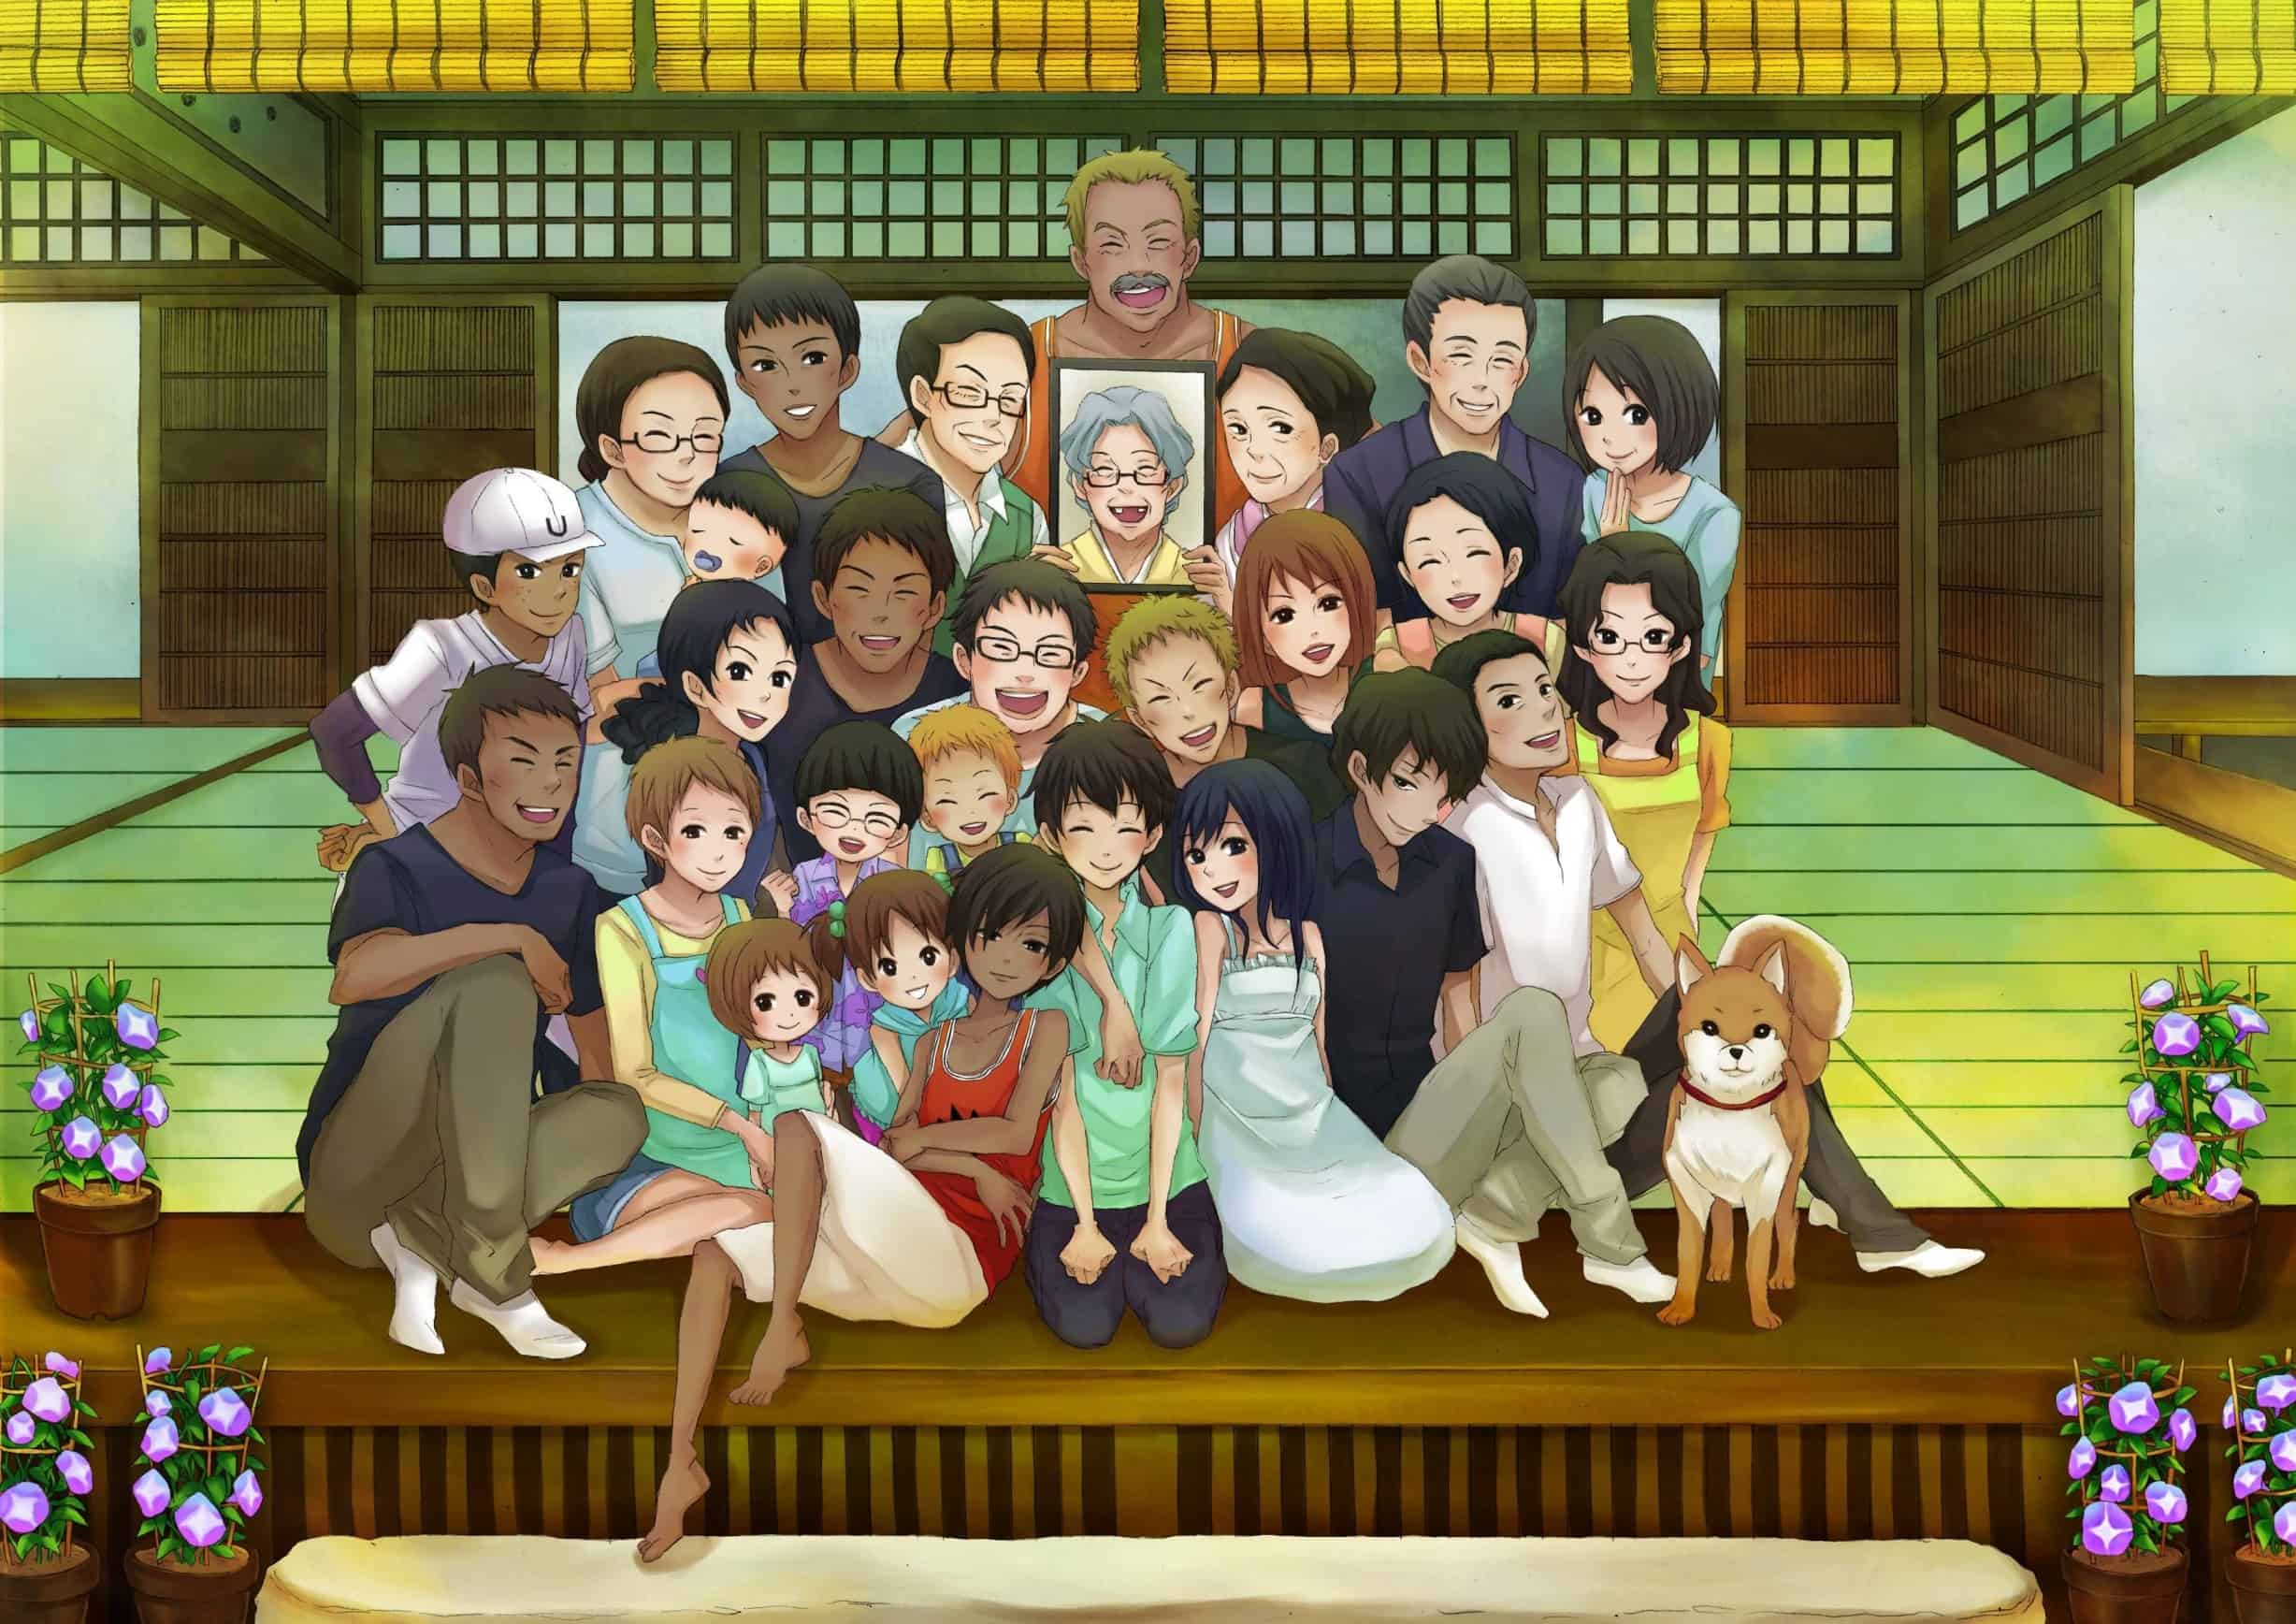 Jinnouchi Family refreshingly taking up a picture together